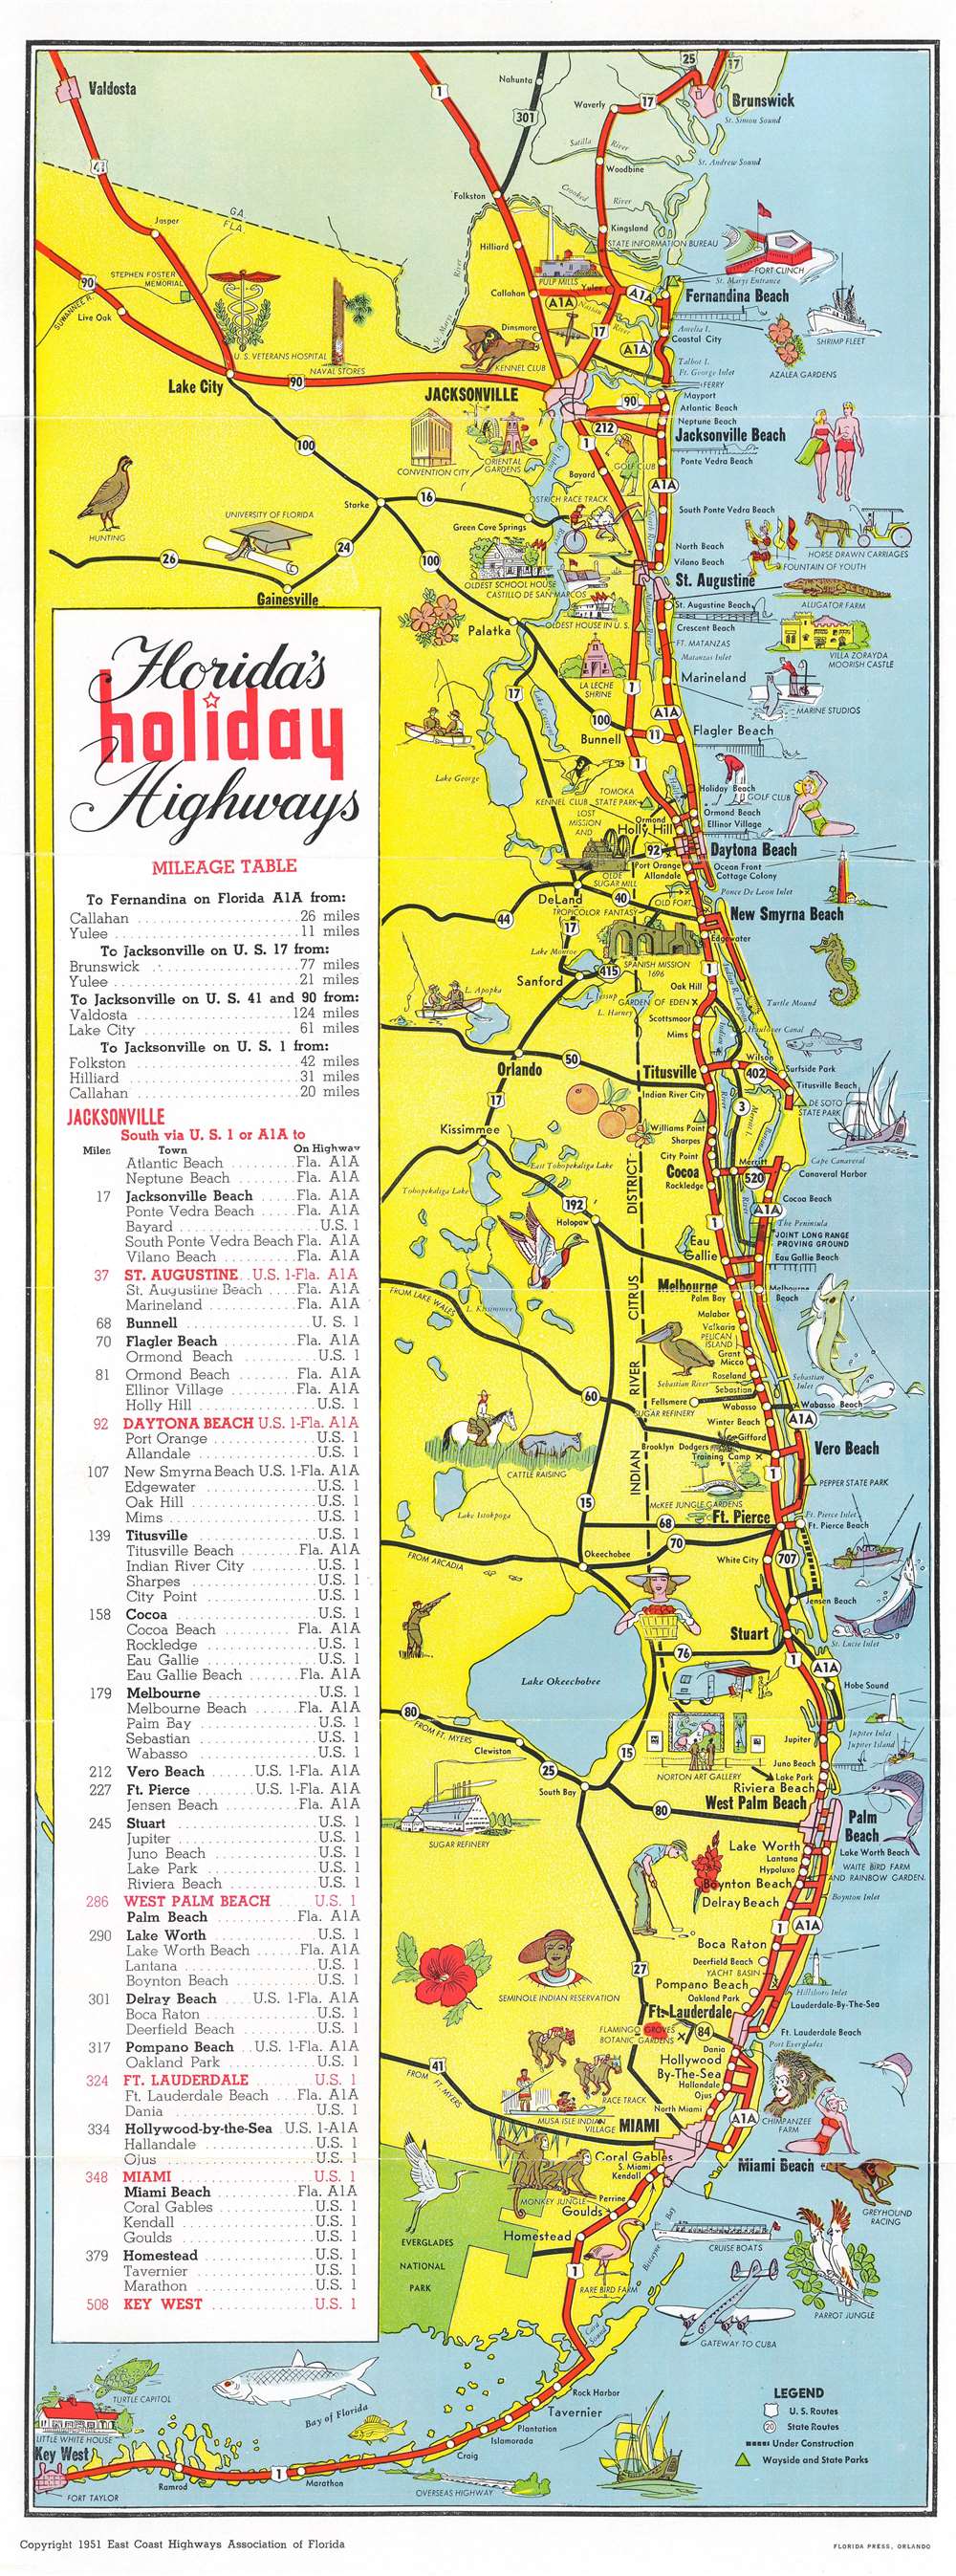 Florida's Holiday Highways for all of Florida's Famous East Coast. - Main View